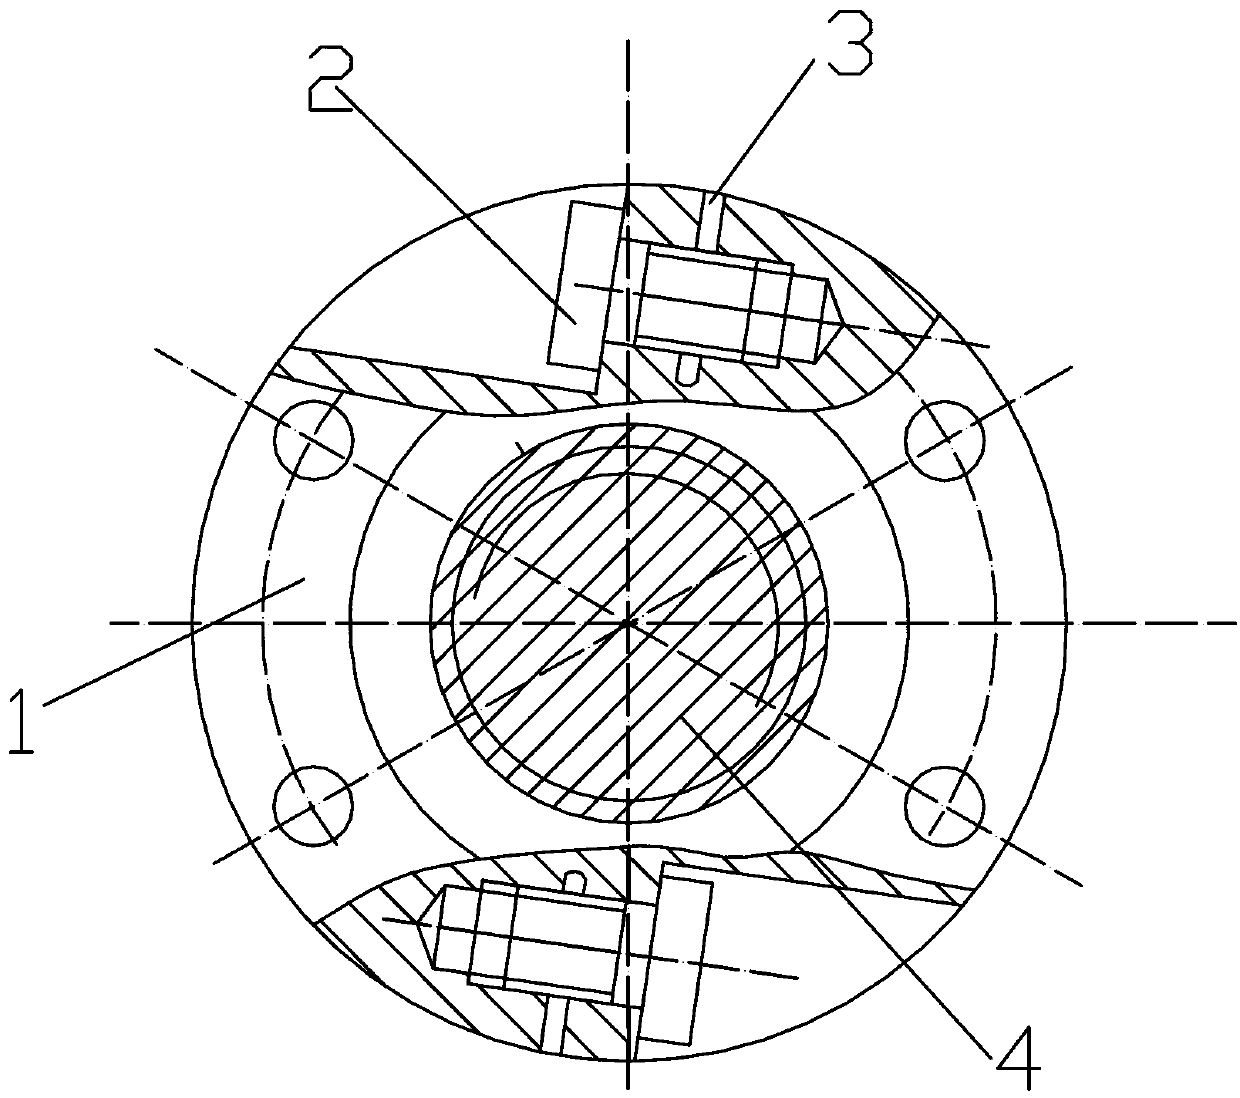 Device capable of eliminating gap between screw and nut